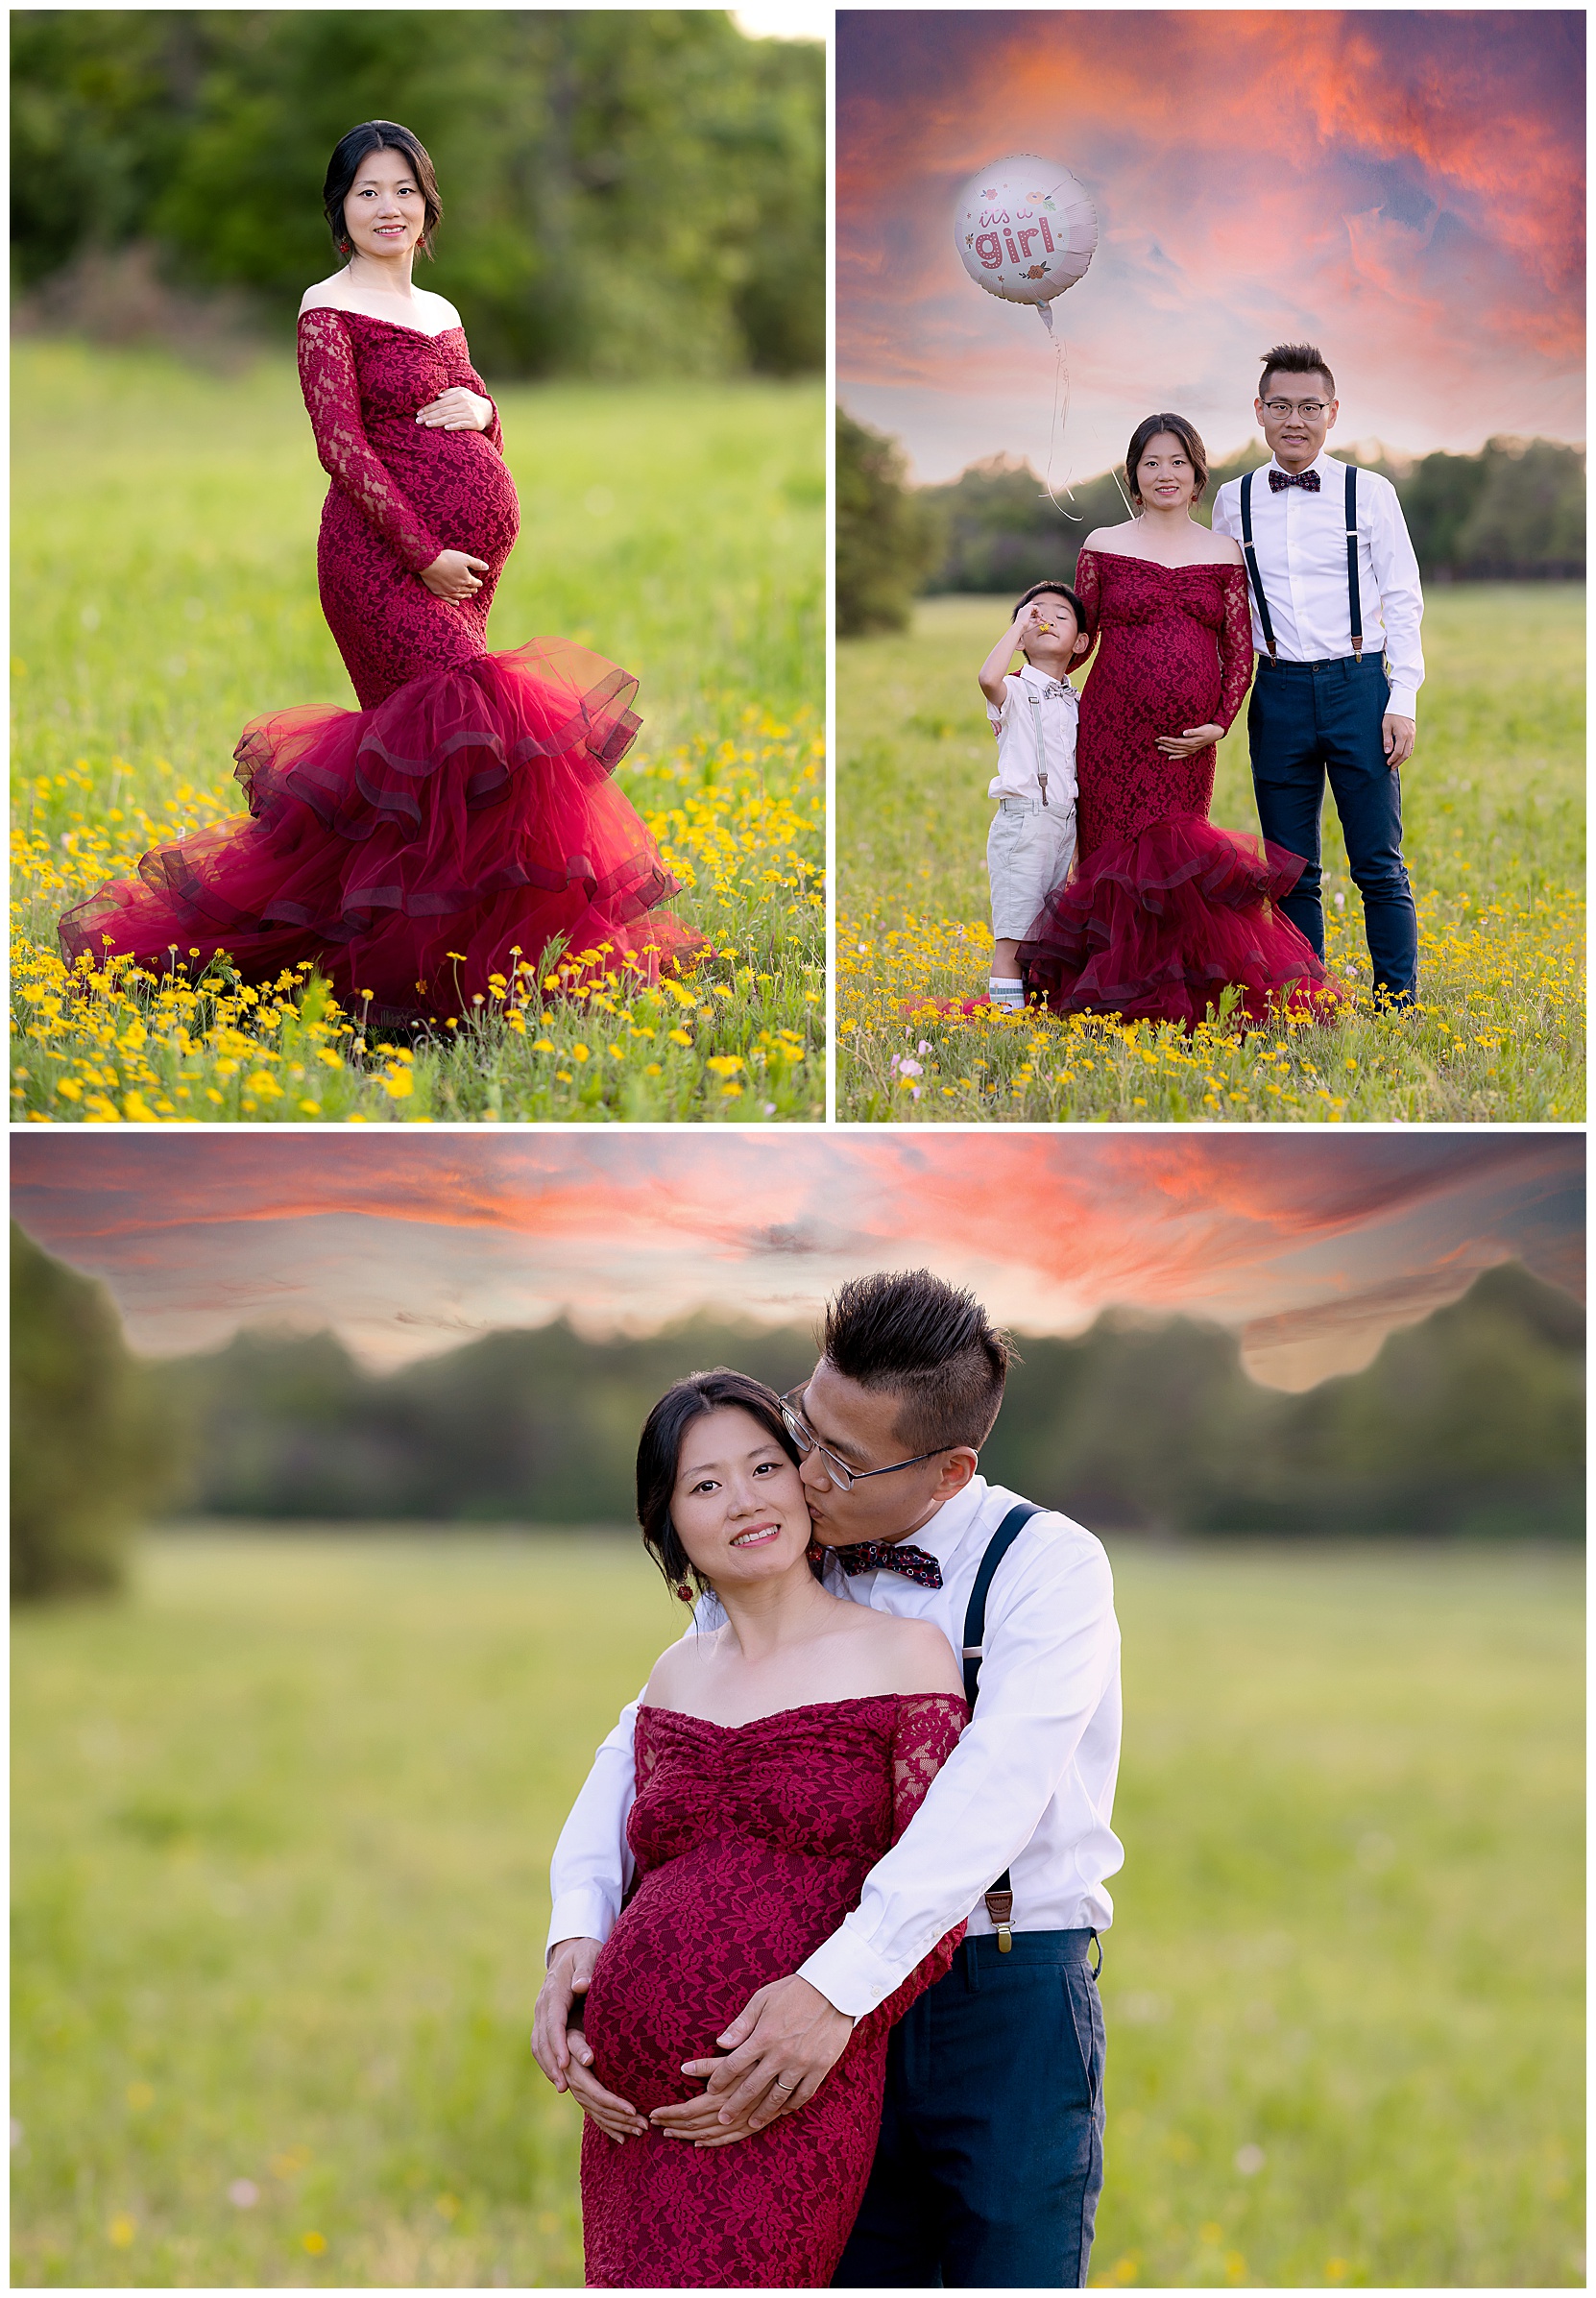 Brushy creek maternity photos featuring a woman in a red maternity gown, her young sun, and her husband